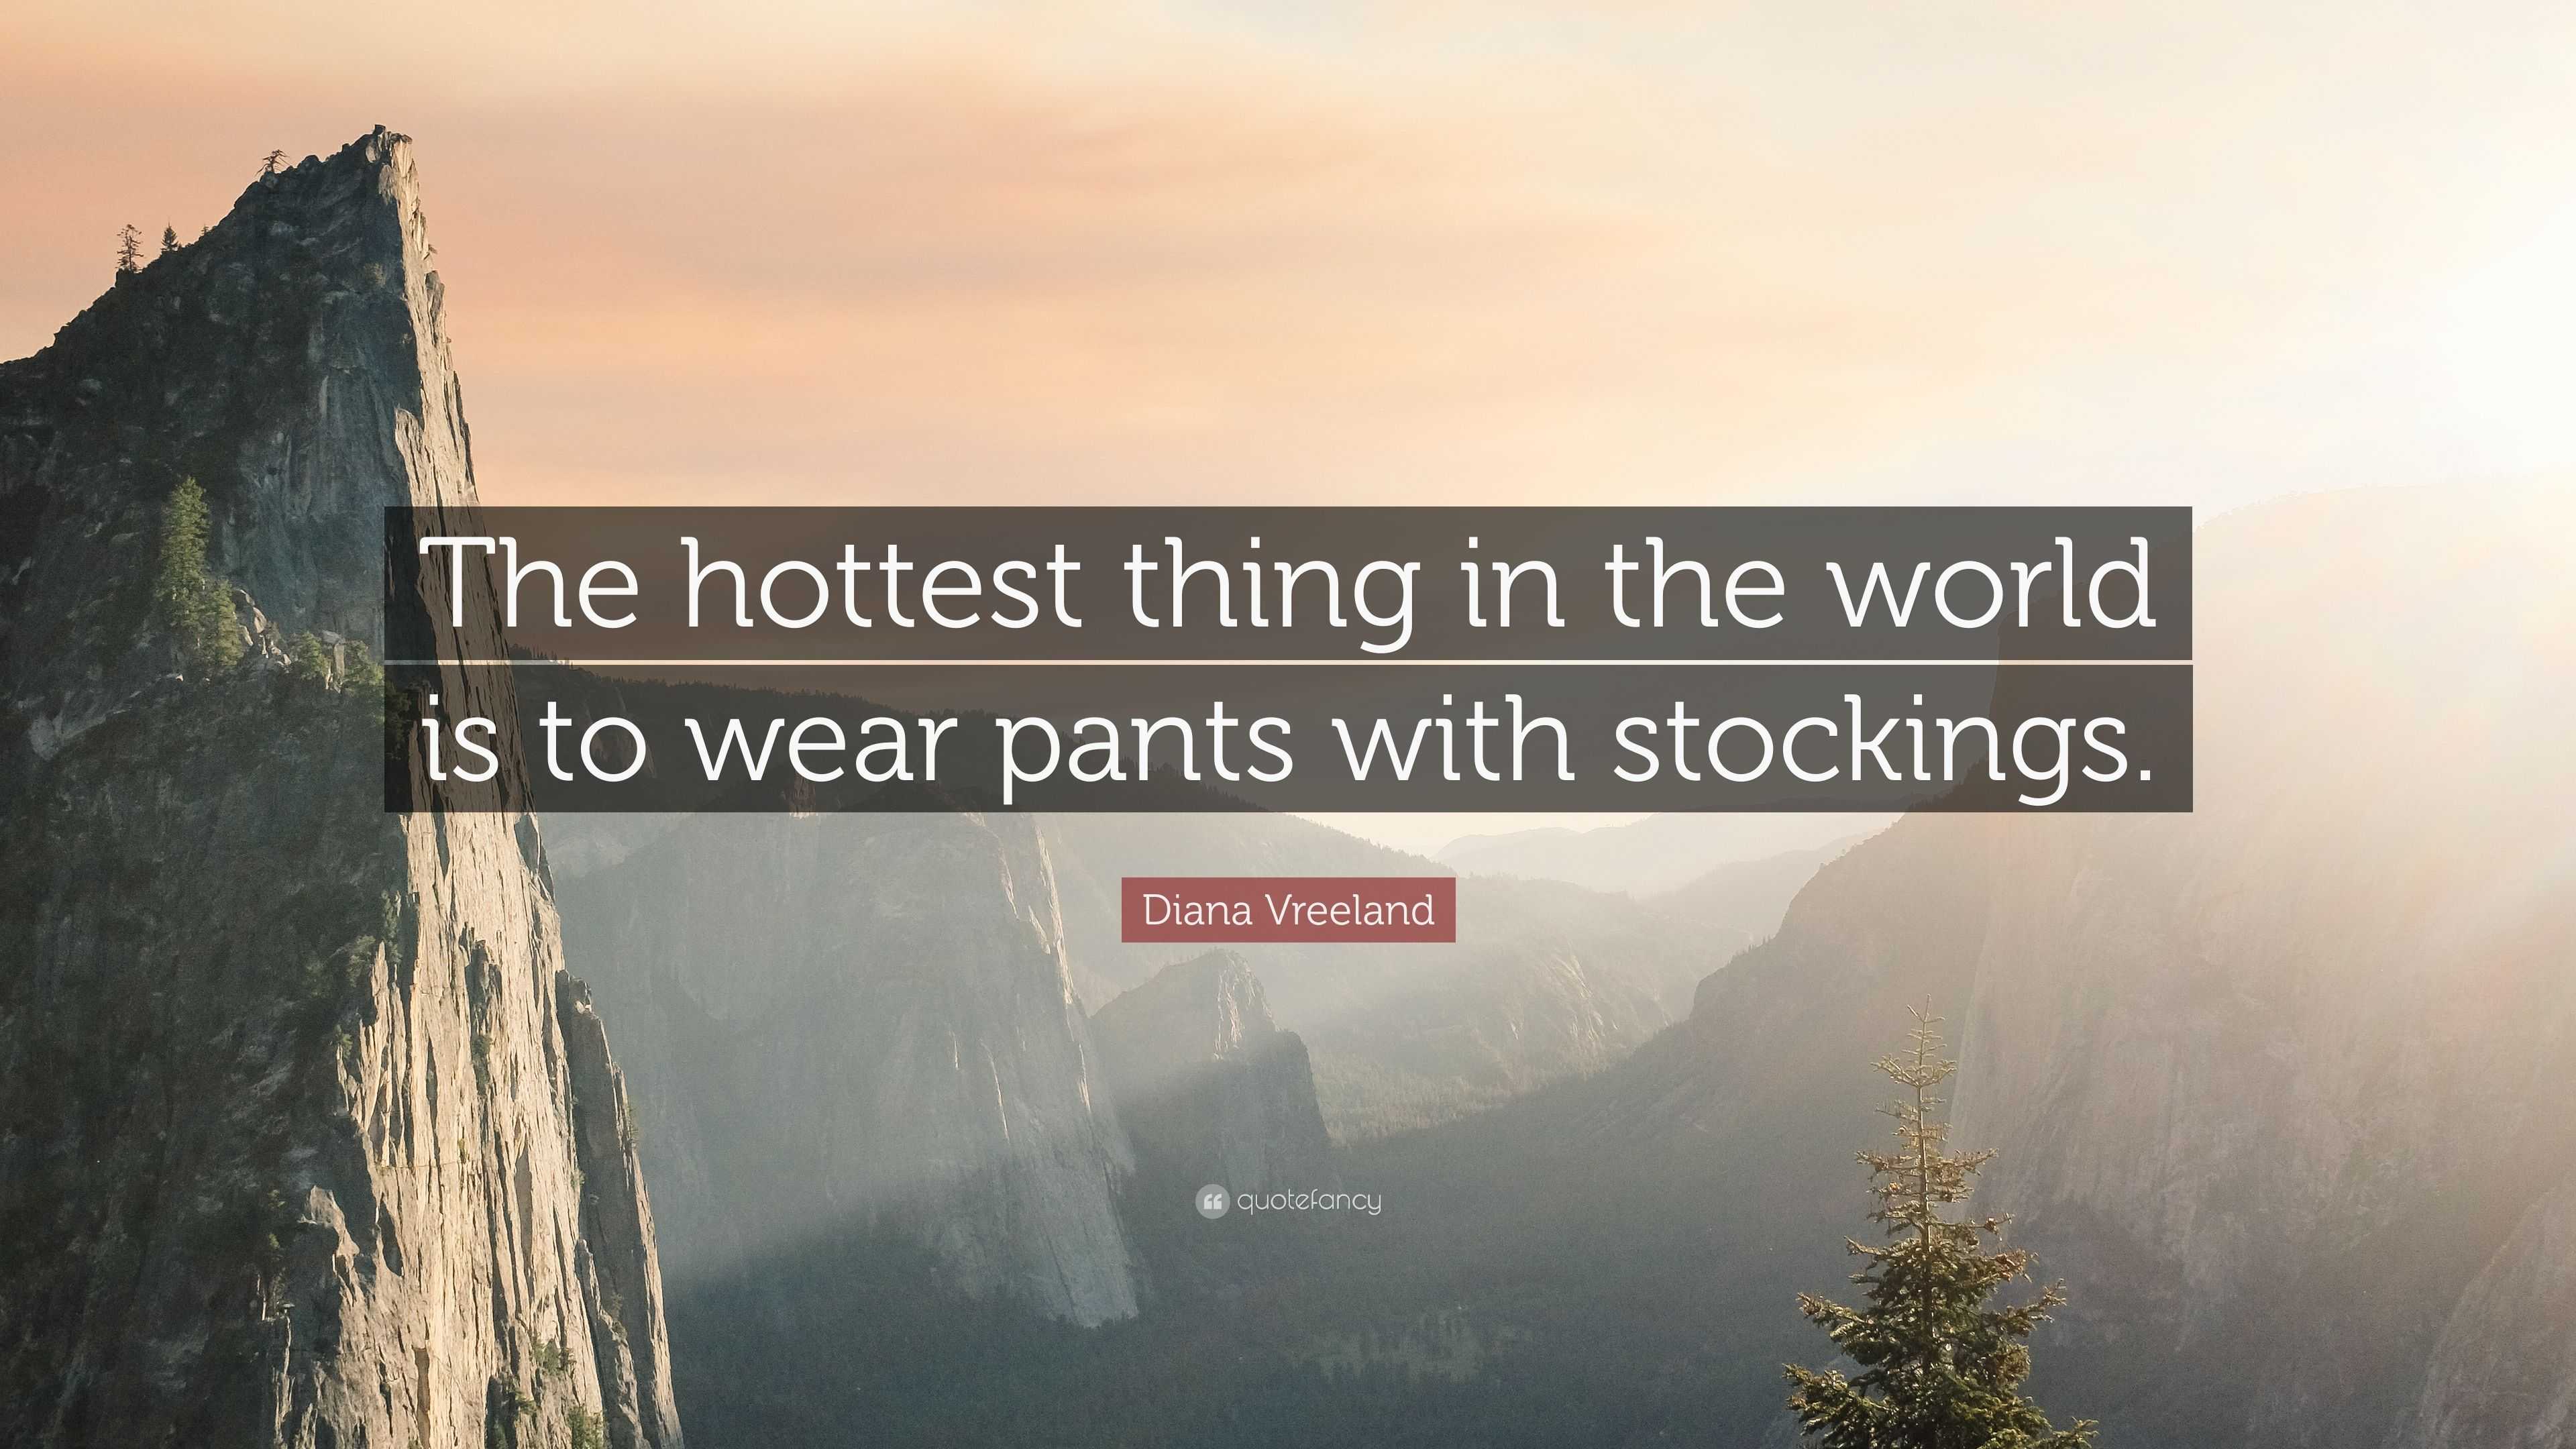 Diana Vreeland Quote: “The hottest thing in the world is to wear